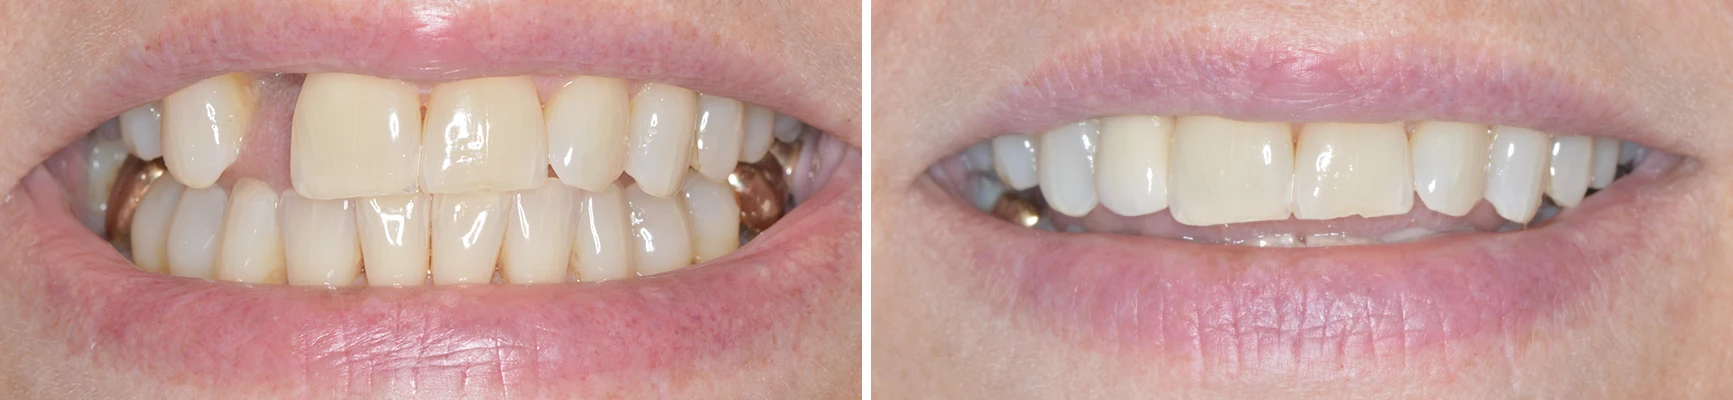 Dentist Waukesha WI Implant Before and After